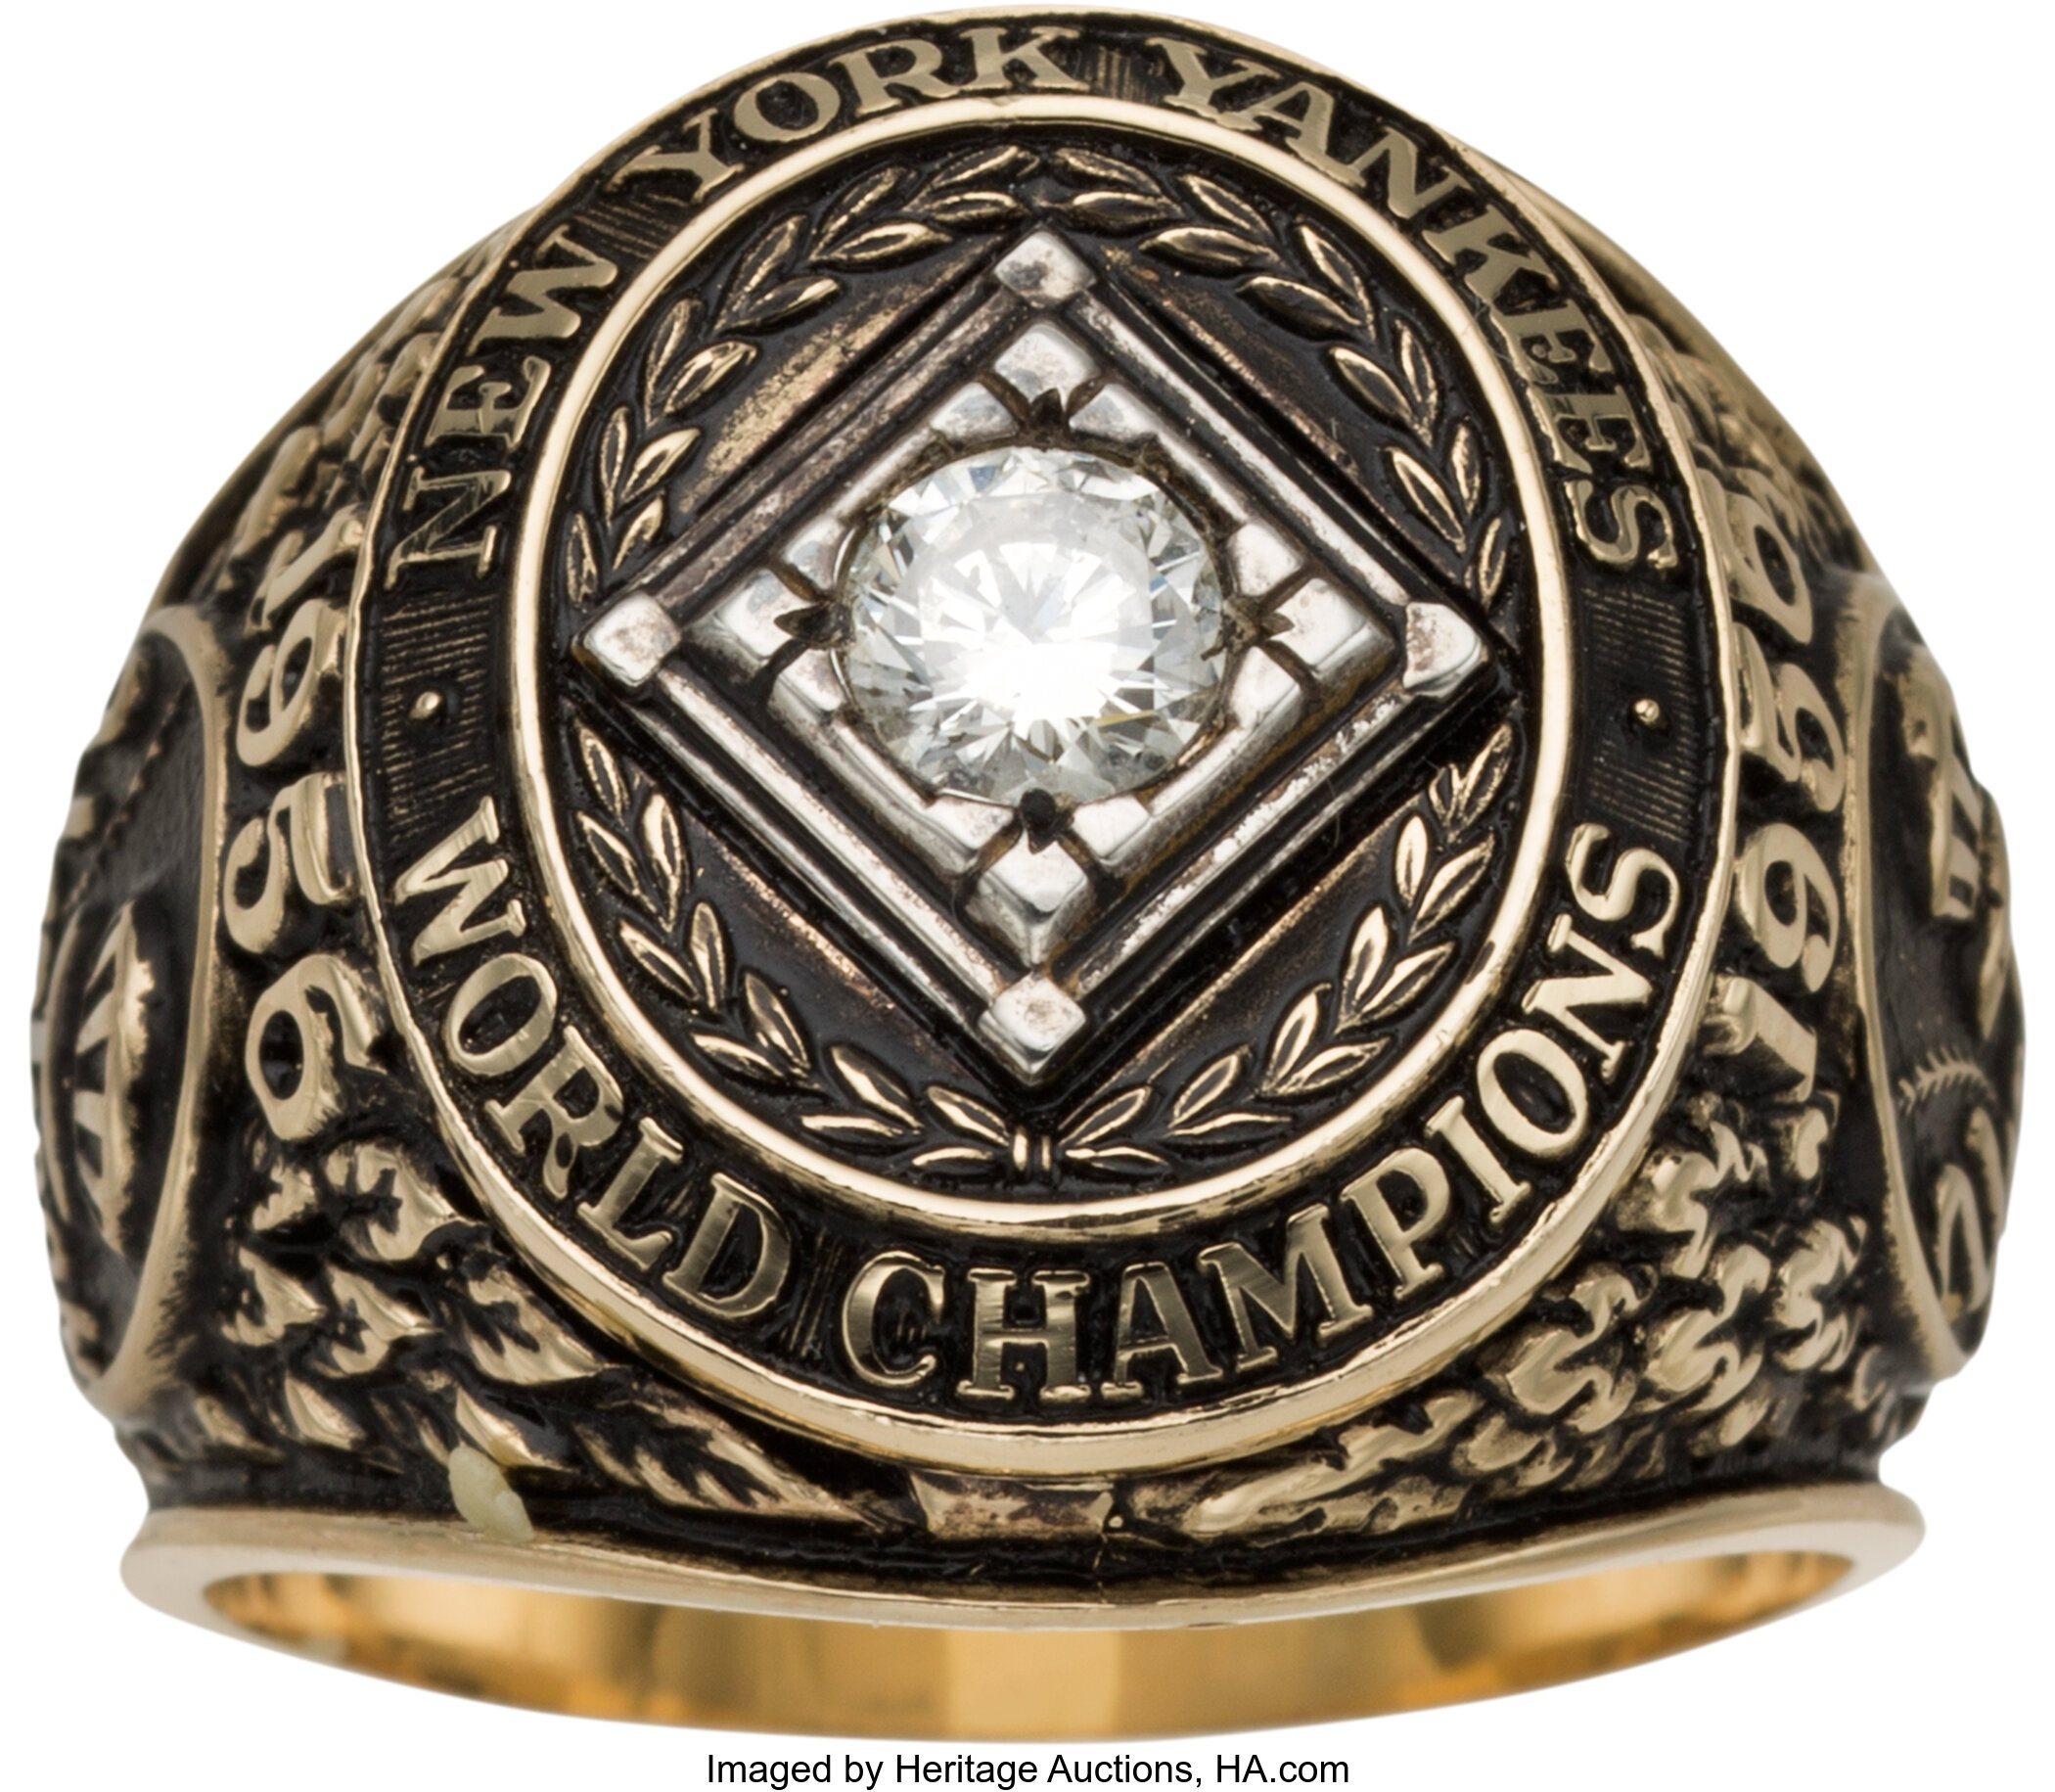 New York Yankees Dynasty World Series Rings LE 16x20 Photo Team-Signed by  (11) with Derek